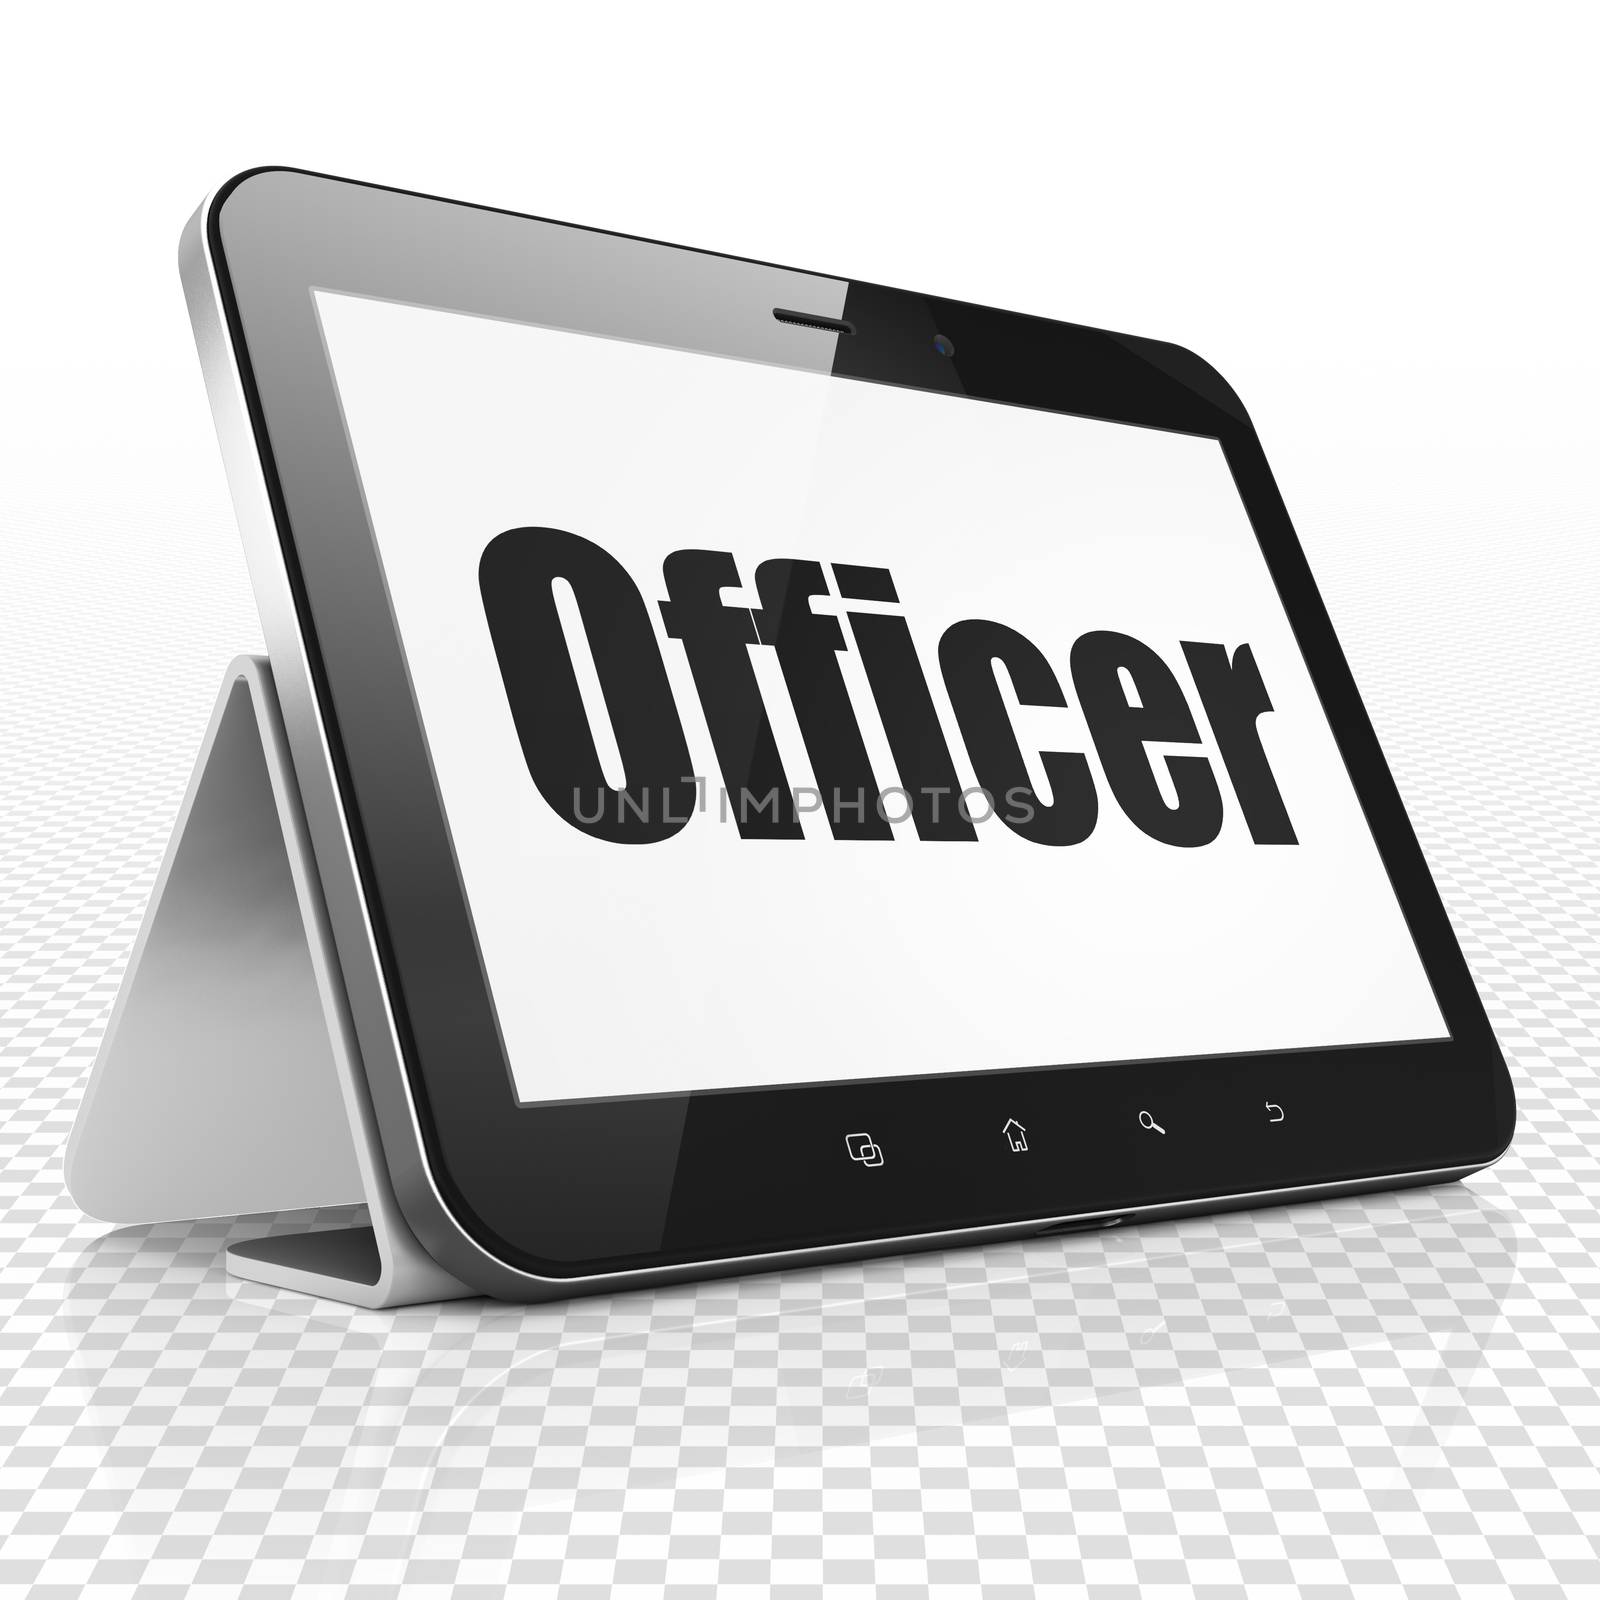 Law concept: Tablet Computer with black text Officer on display